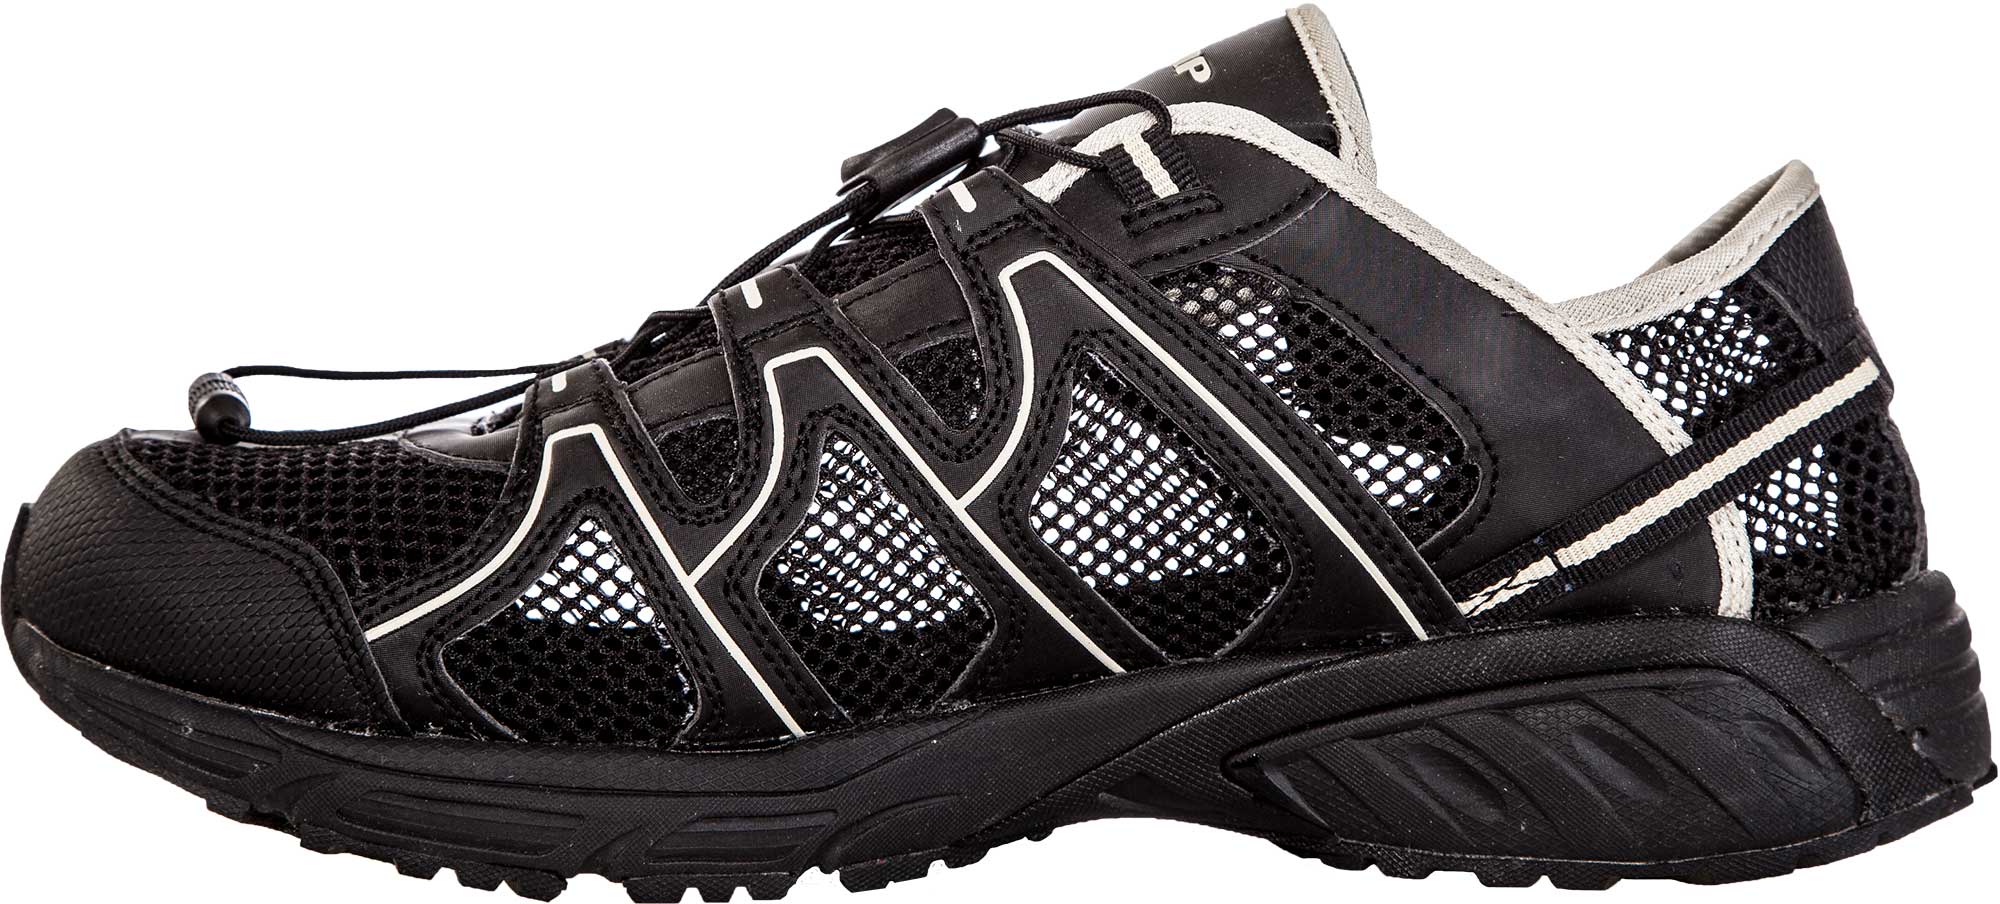 SCALA - Multi-functional breathable shoes